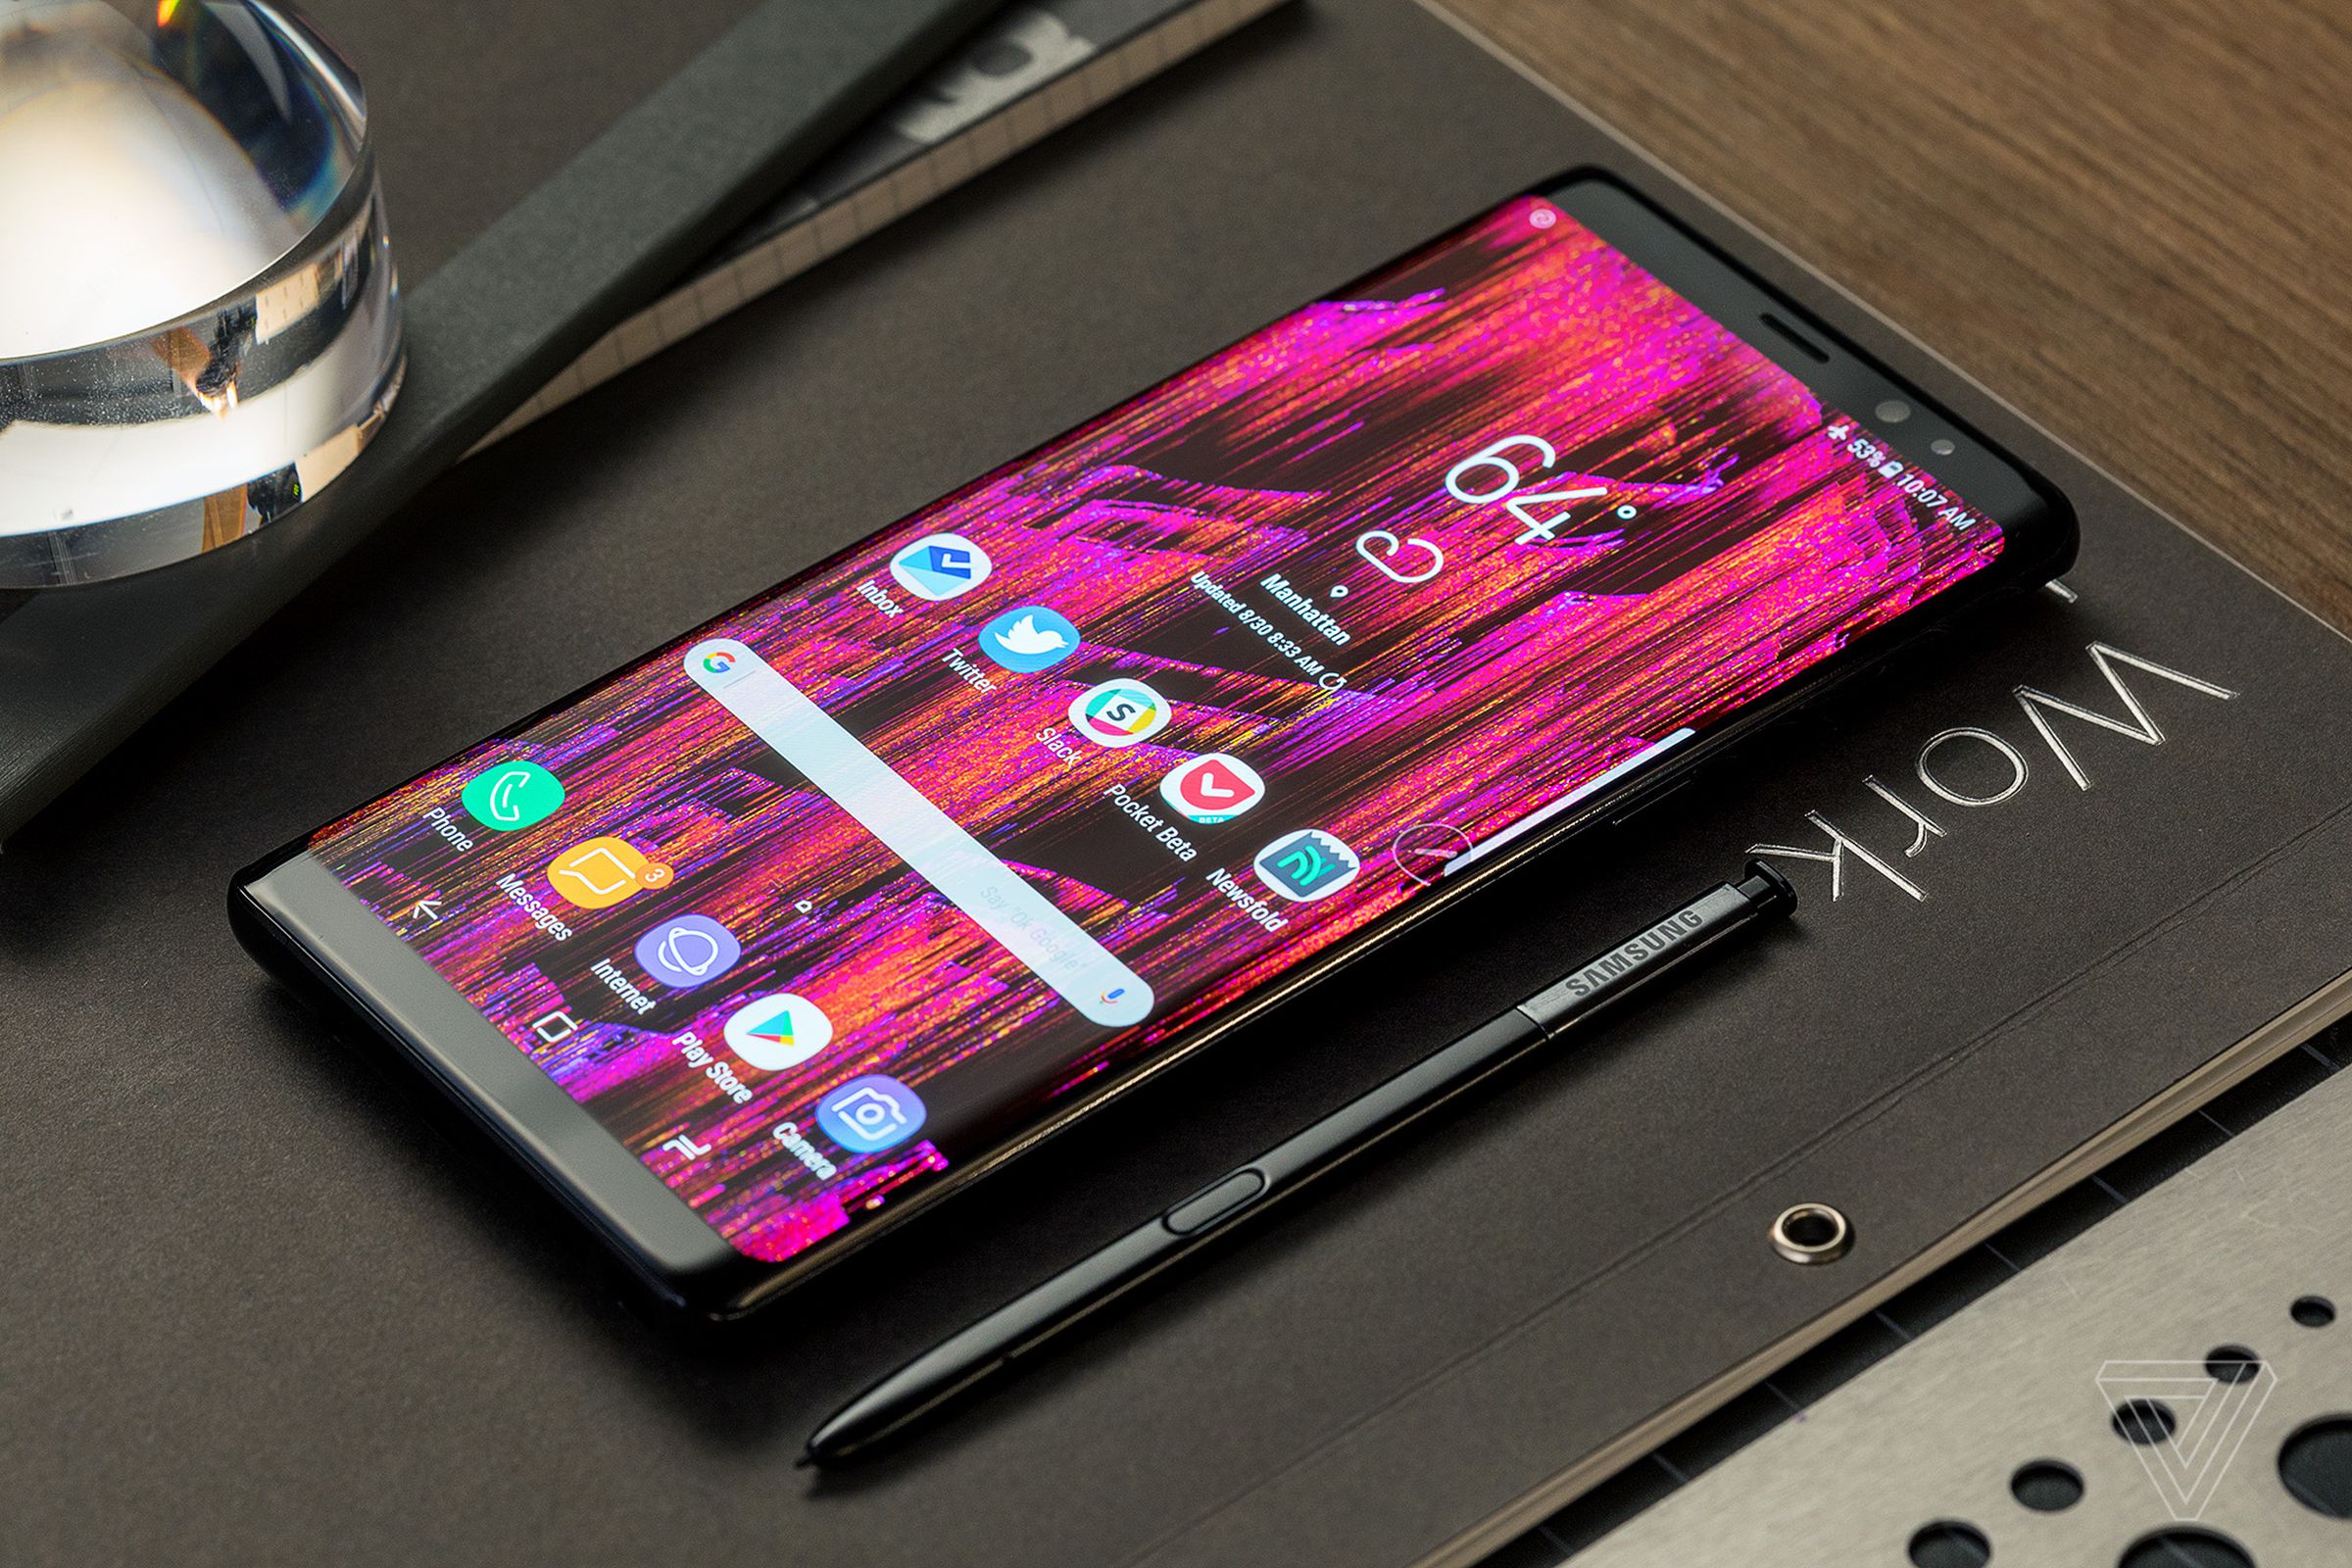 A Galaxy Note 8 rests on a table. The stylus is next to it.